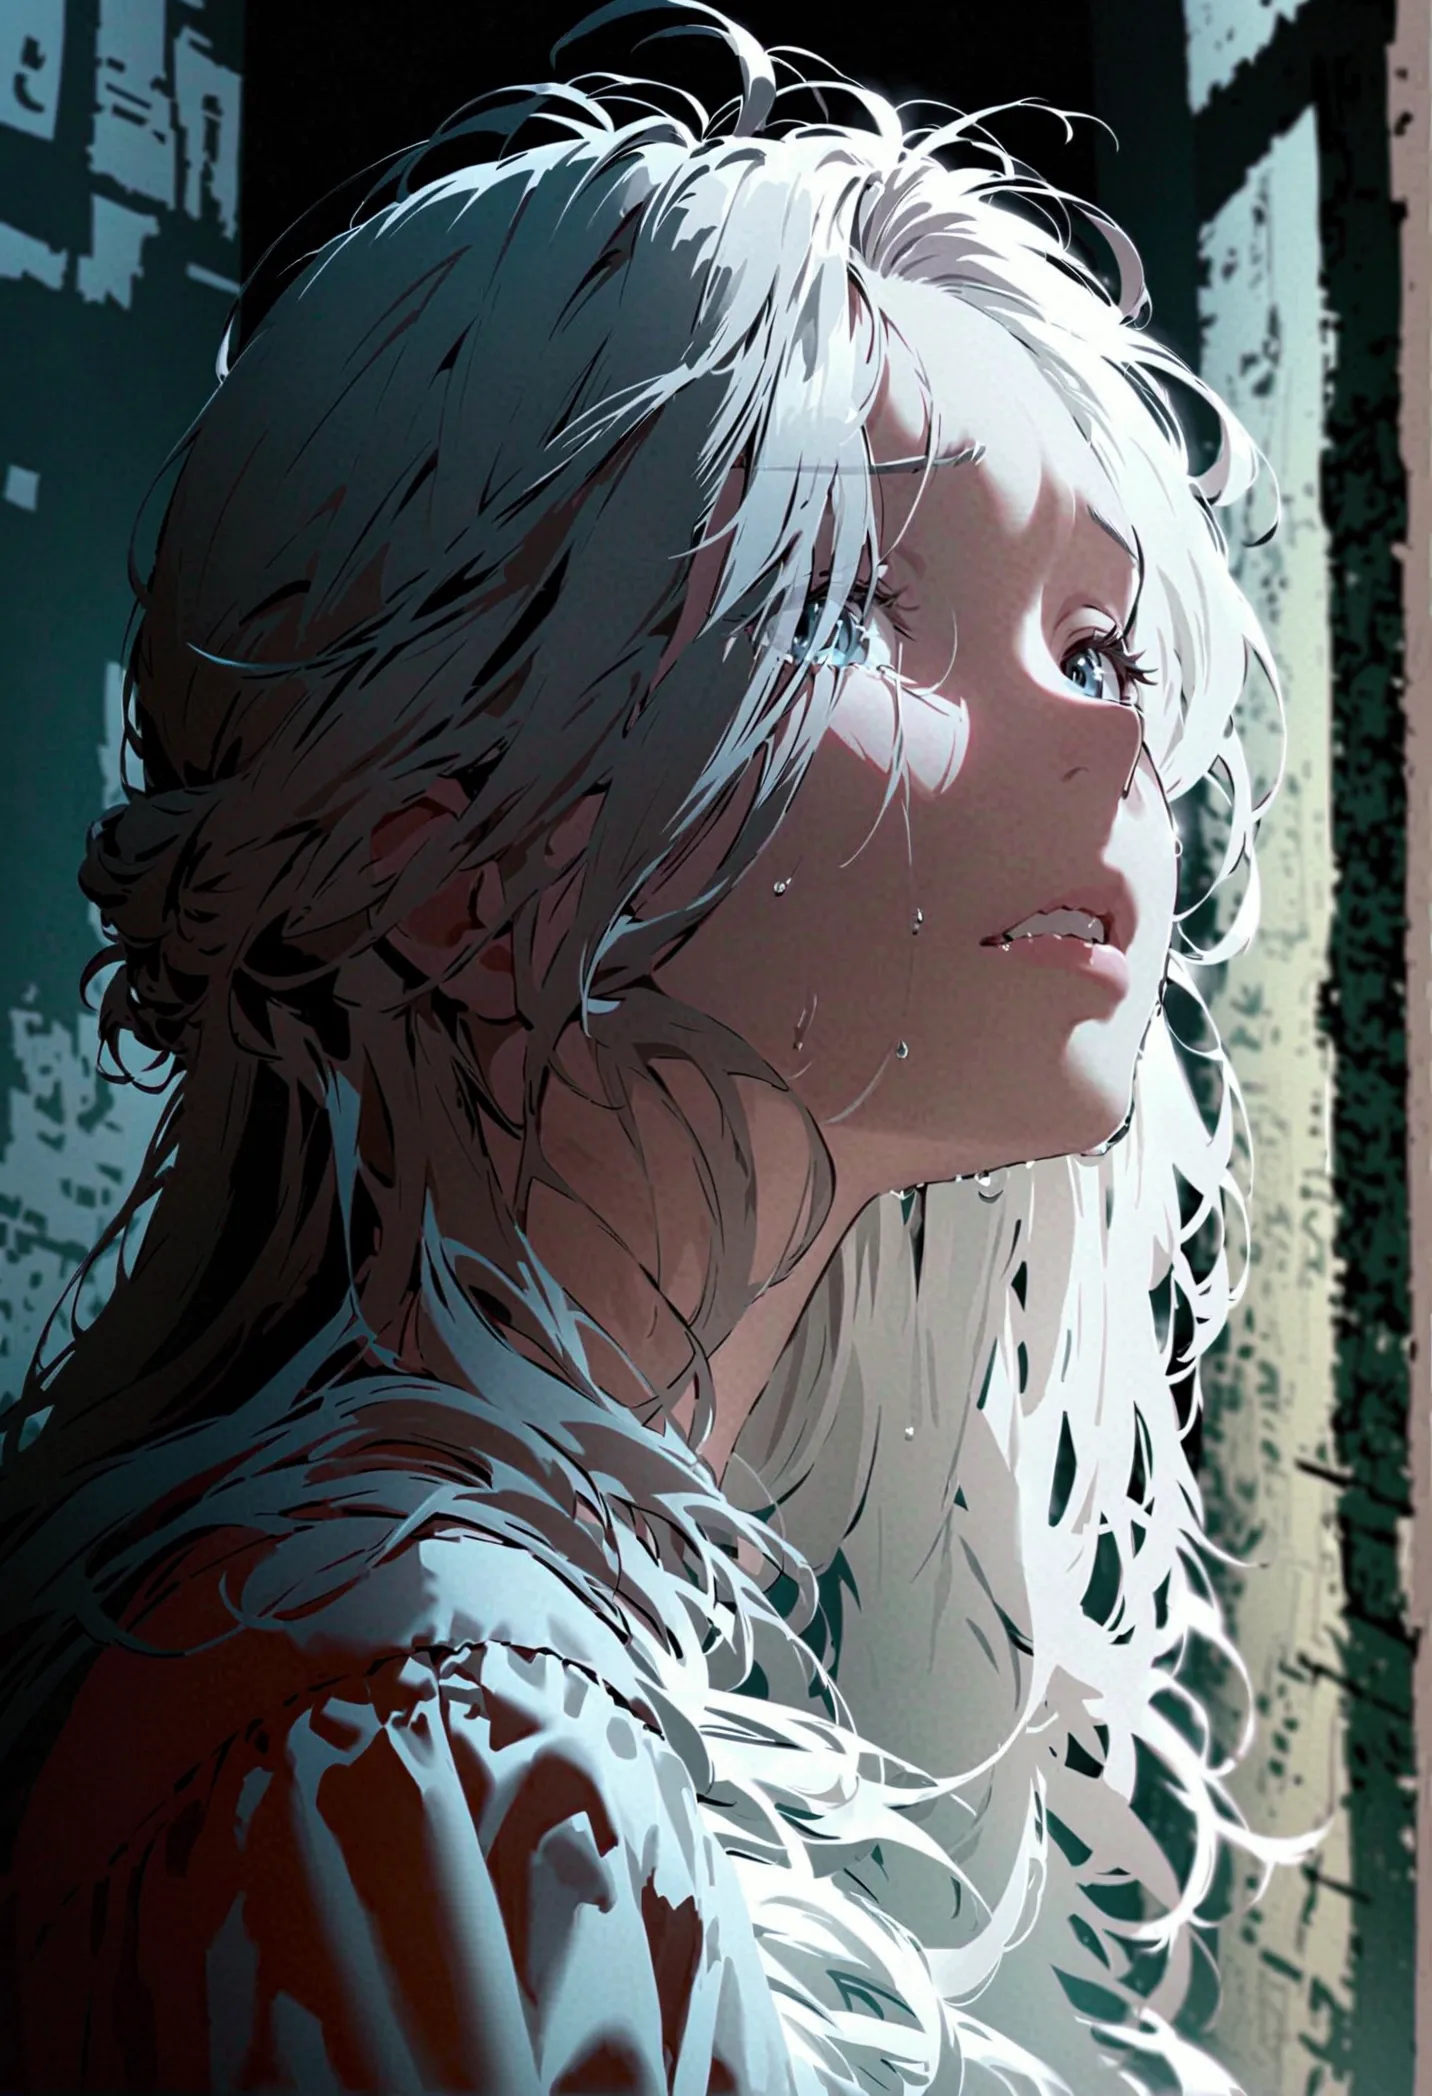 cinematographic drawing,a woman crying, long white hair,just the face,UHD, high resolution, Blurred Background,Dark theme, solit...